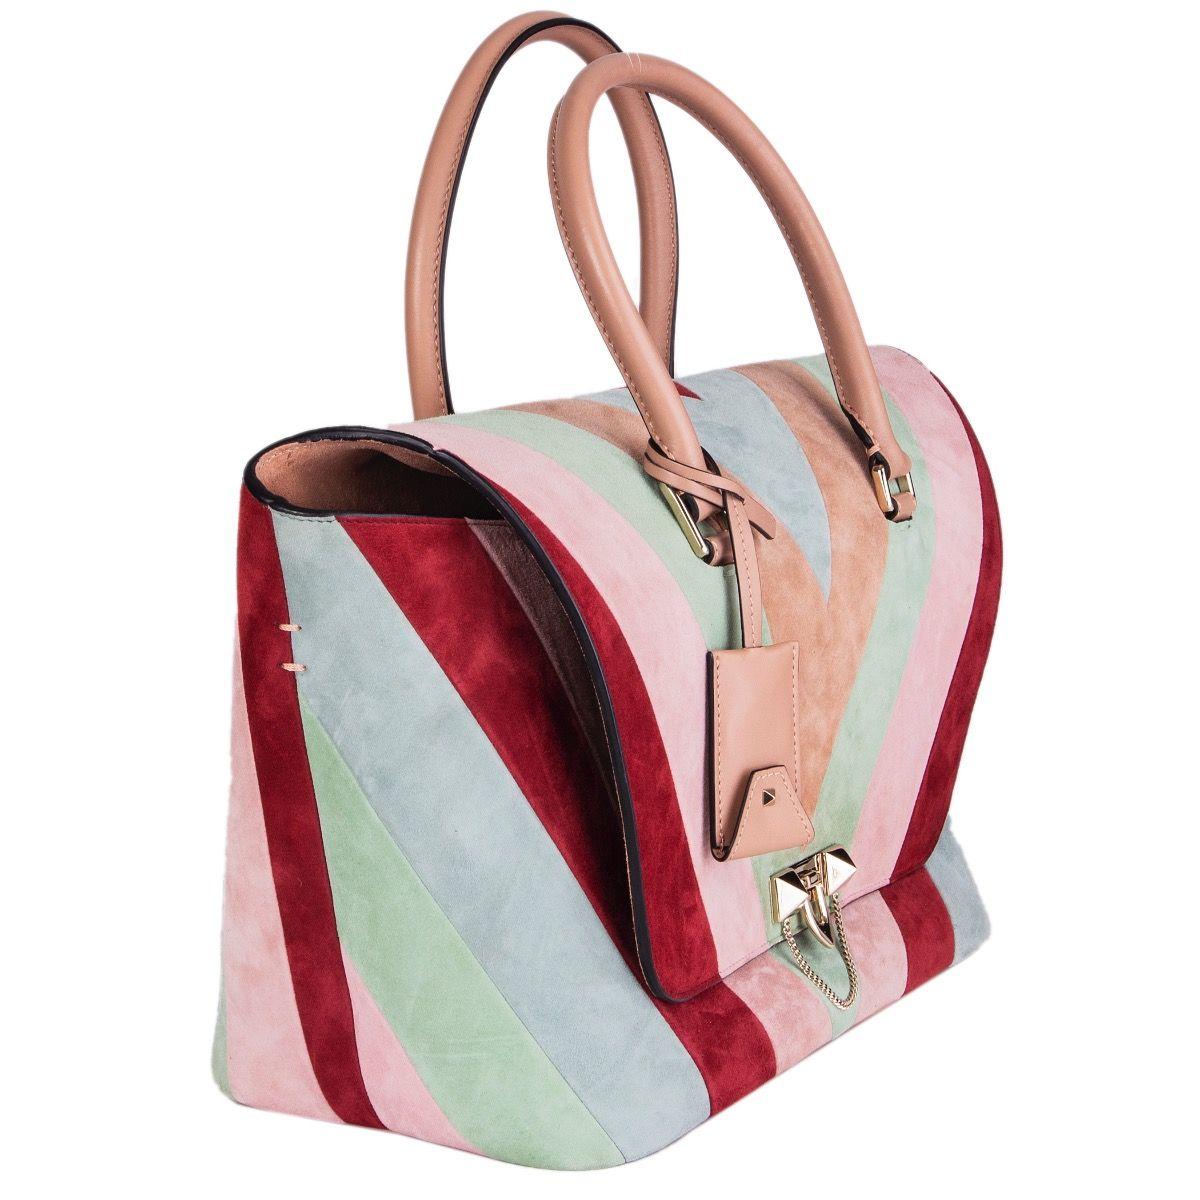 Valentino 'Demilune Medium Chevron' tote in burgundy, nude, pink, sage and light blue suede with nude leather details. Adjustable and detachable shoulder strap. Open pocket on the outside back. Closes with a flip-lock on the front. Lined in nude